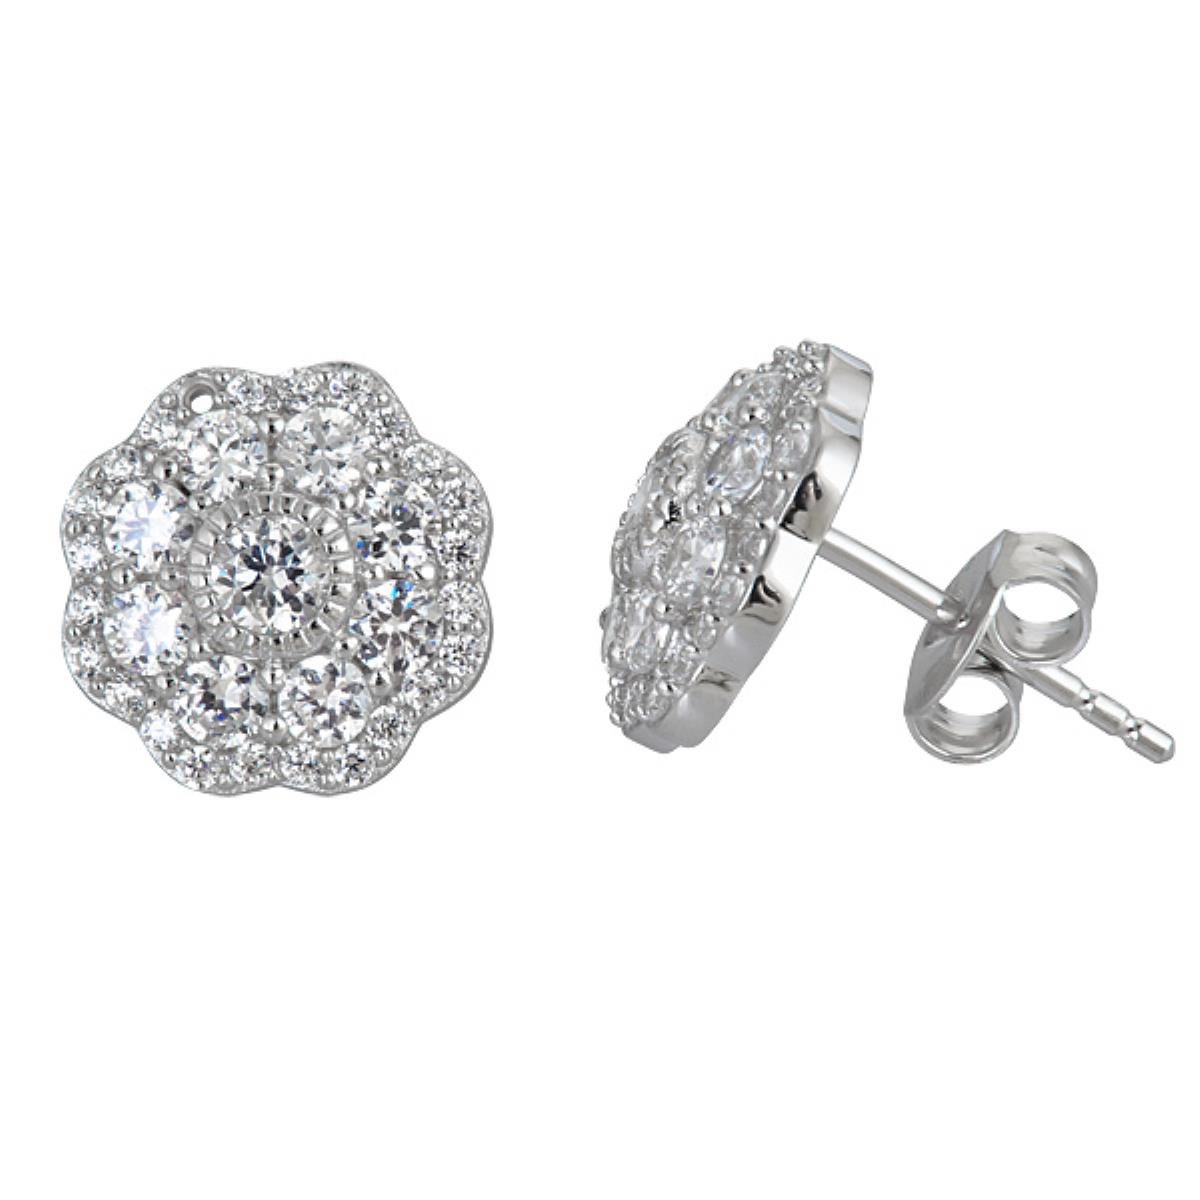 Sterling Silver Pave Cluster Stud Earrings